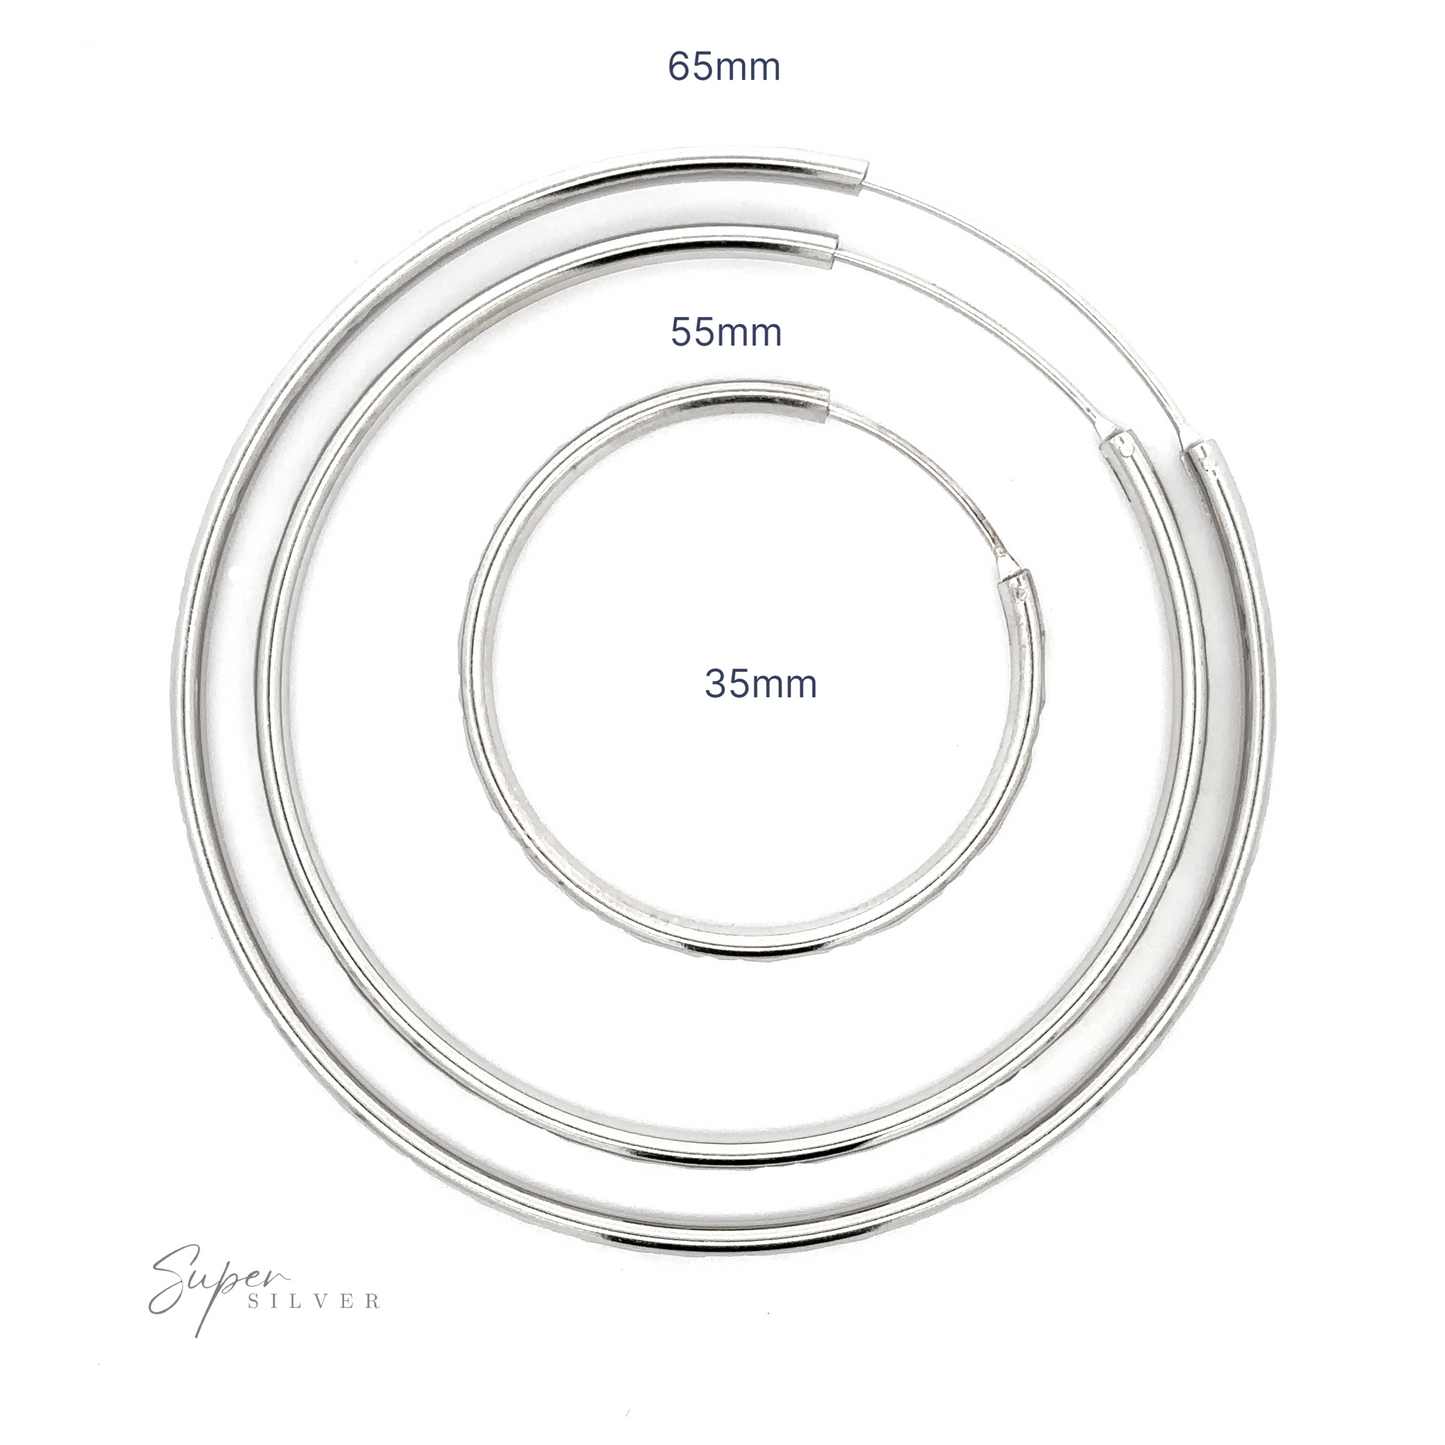 
                  
                    Three Modern 3mm Rhodium Finish Facet Hoops of varying sizes, labeled as 35mm, 55mm, and 65mm, showcased in a top-down view on a white background.
                  
                